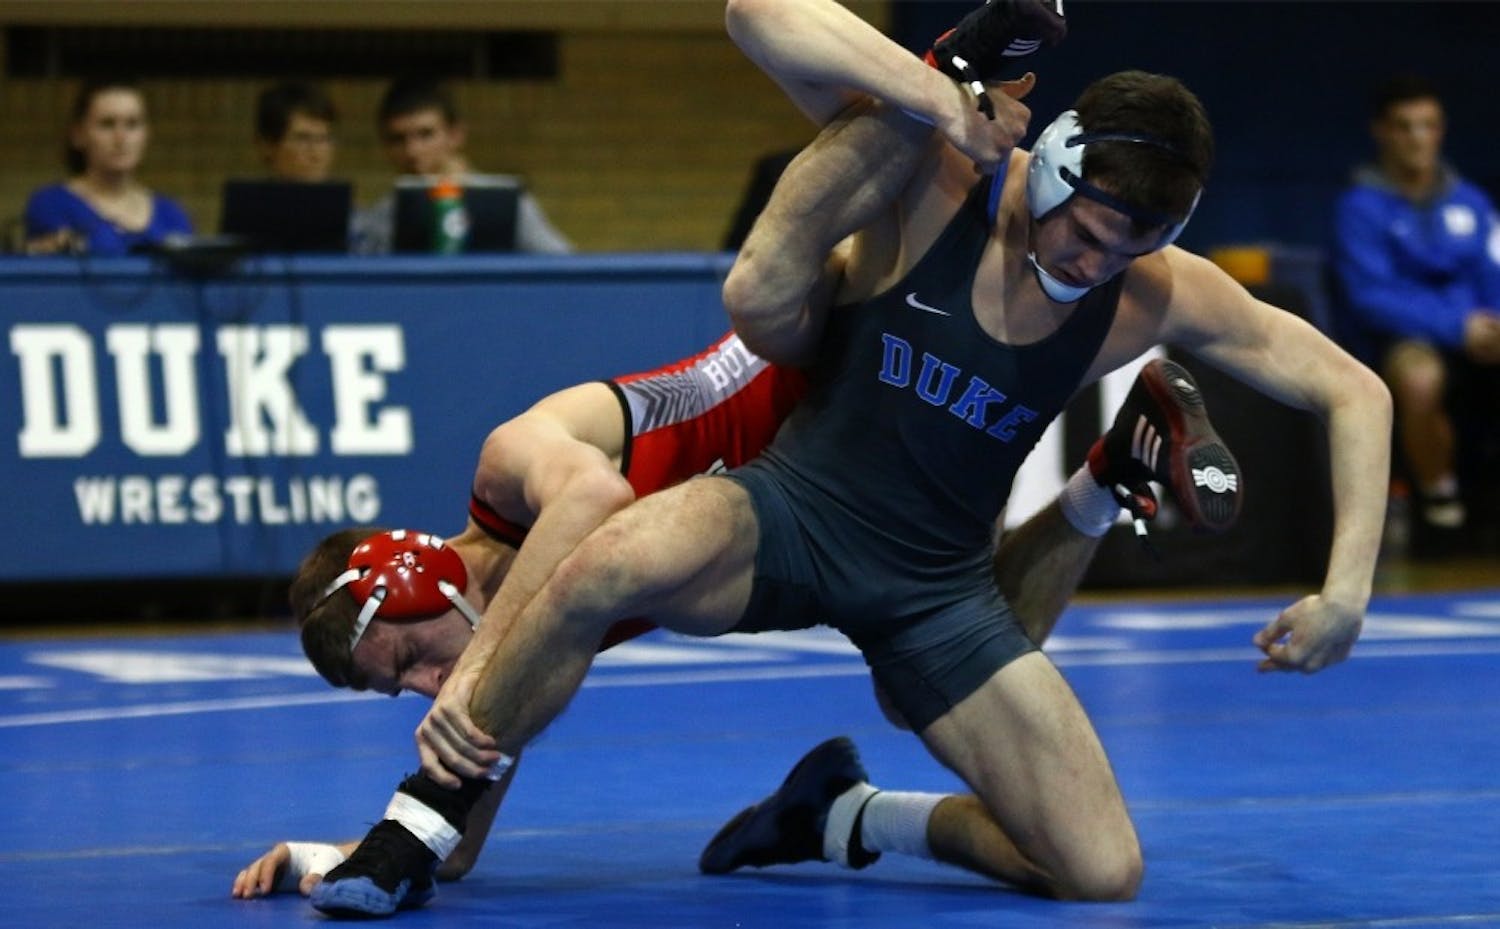 Duke wrestling has been out of sorts lately.